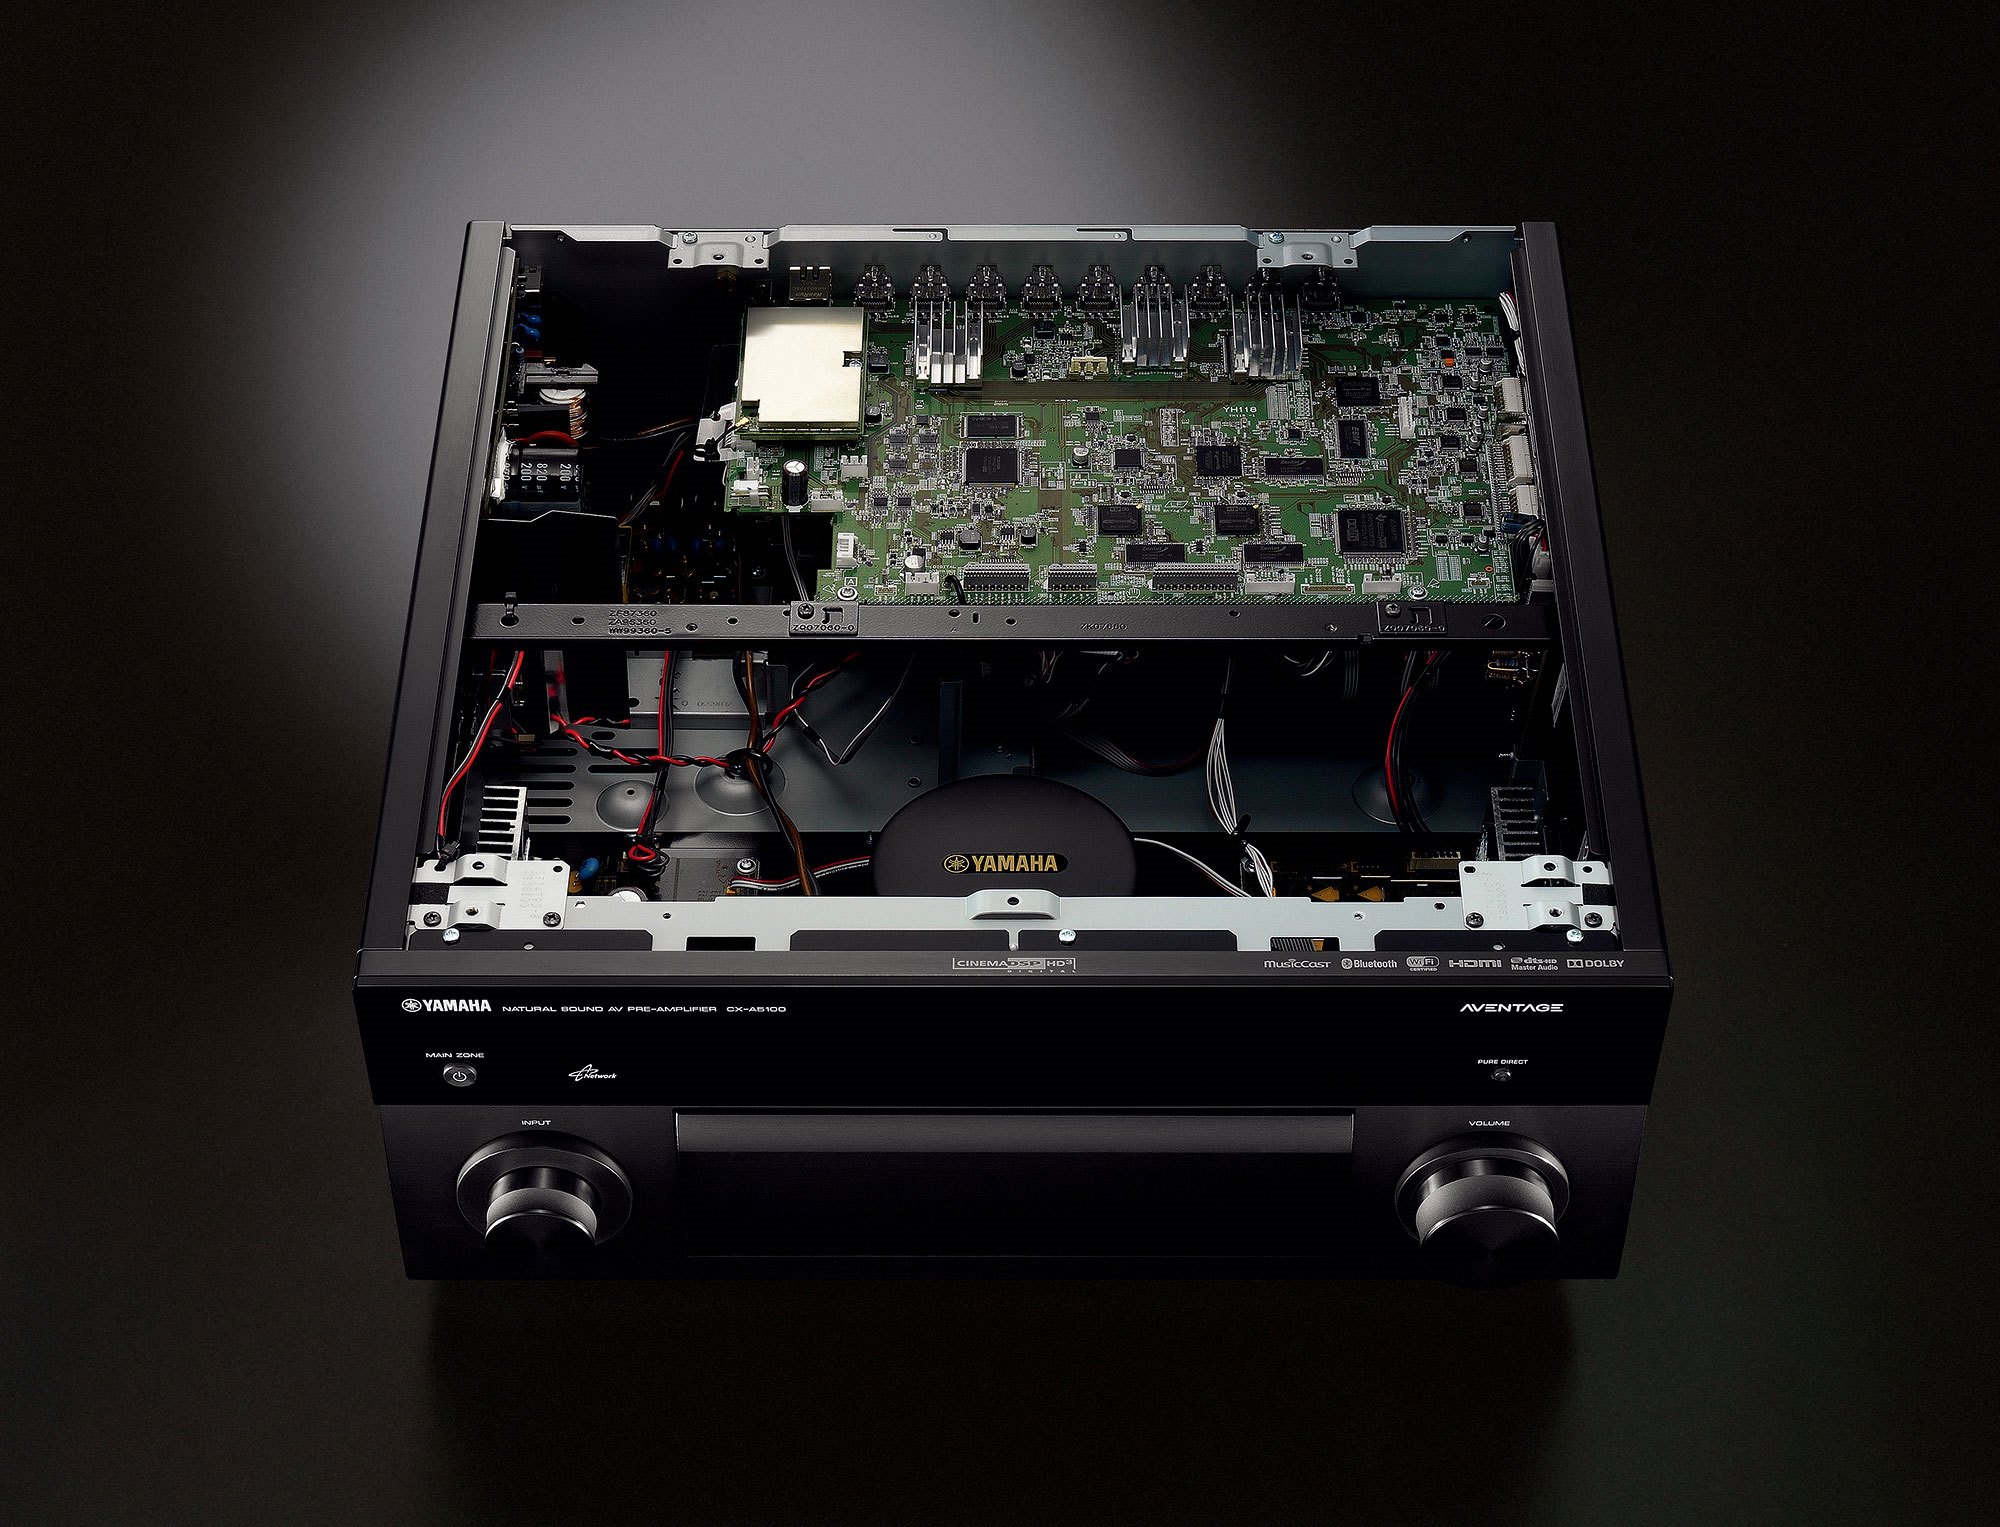 CX-A5100 - Overview - AV Receivers - Audio & Visual